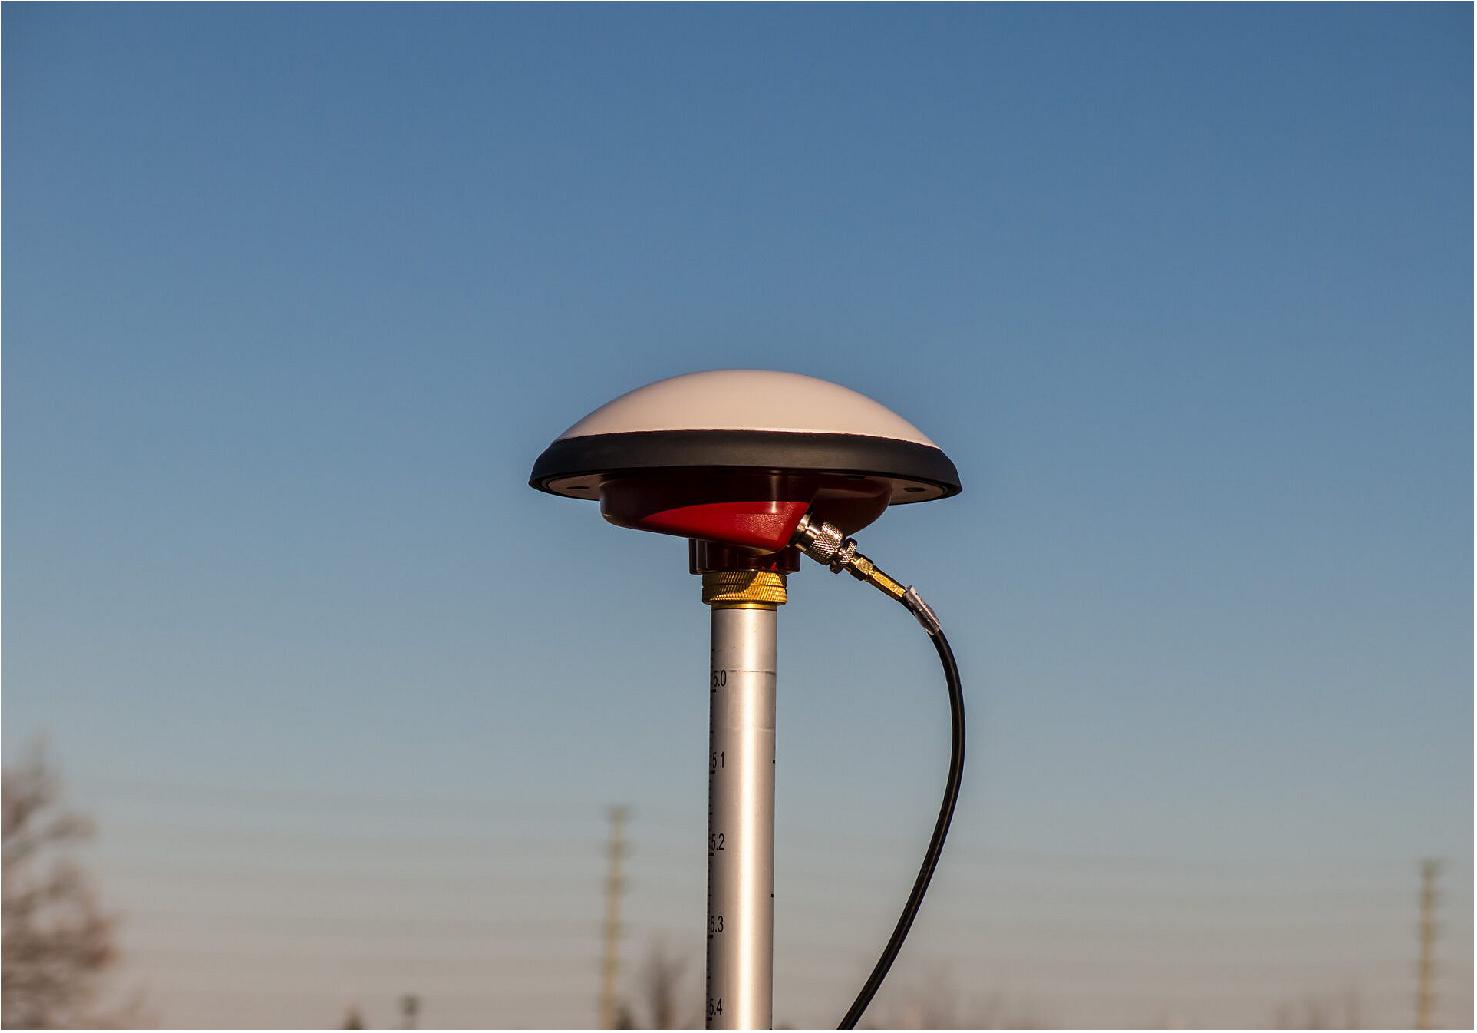 Figure 1: VeroStar antenna. Tallysman's new ESA-supported wide-bandwidth satnav antenna has been designed receive both satellite and augmentation signals from anywhere in the sky, even down to just a couple of degrees above the horizon (image credit: Tallysman)